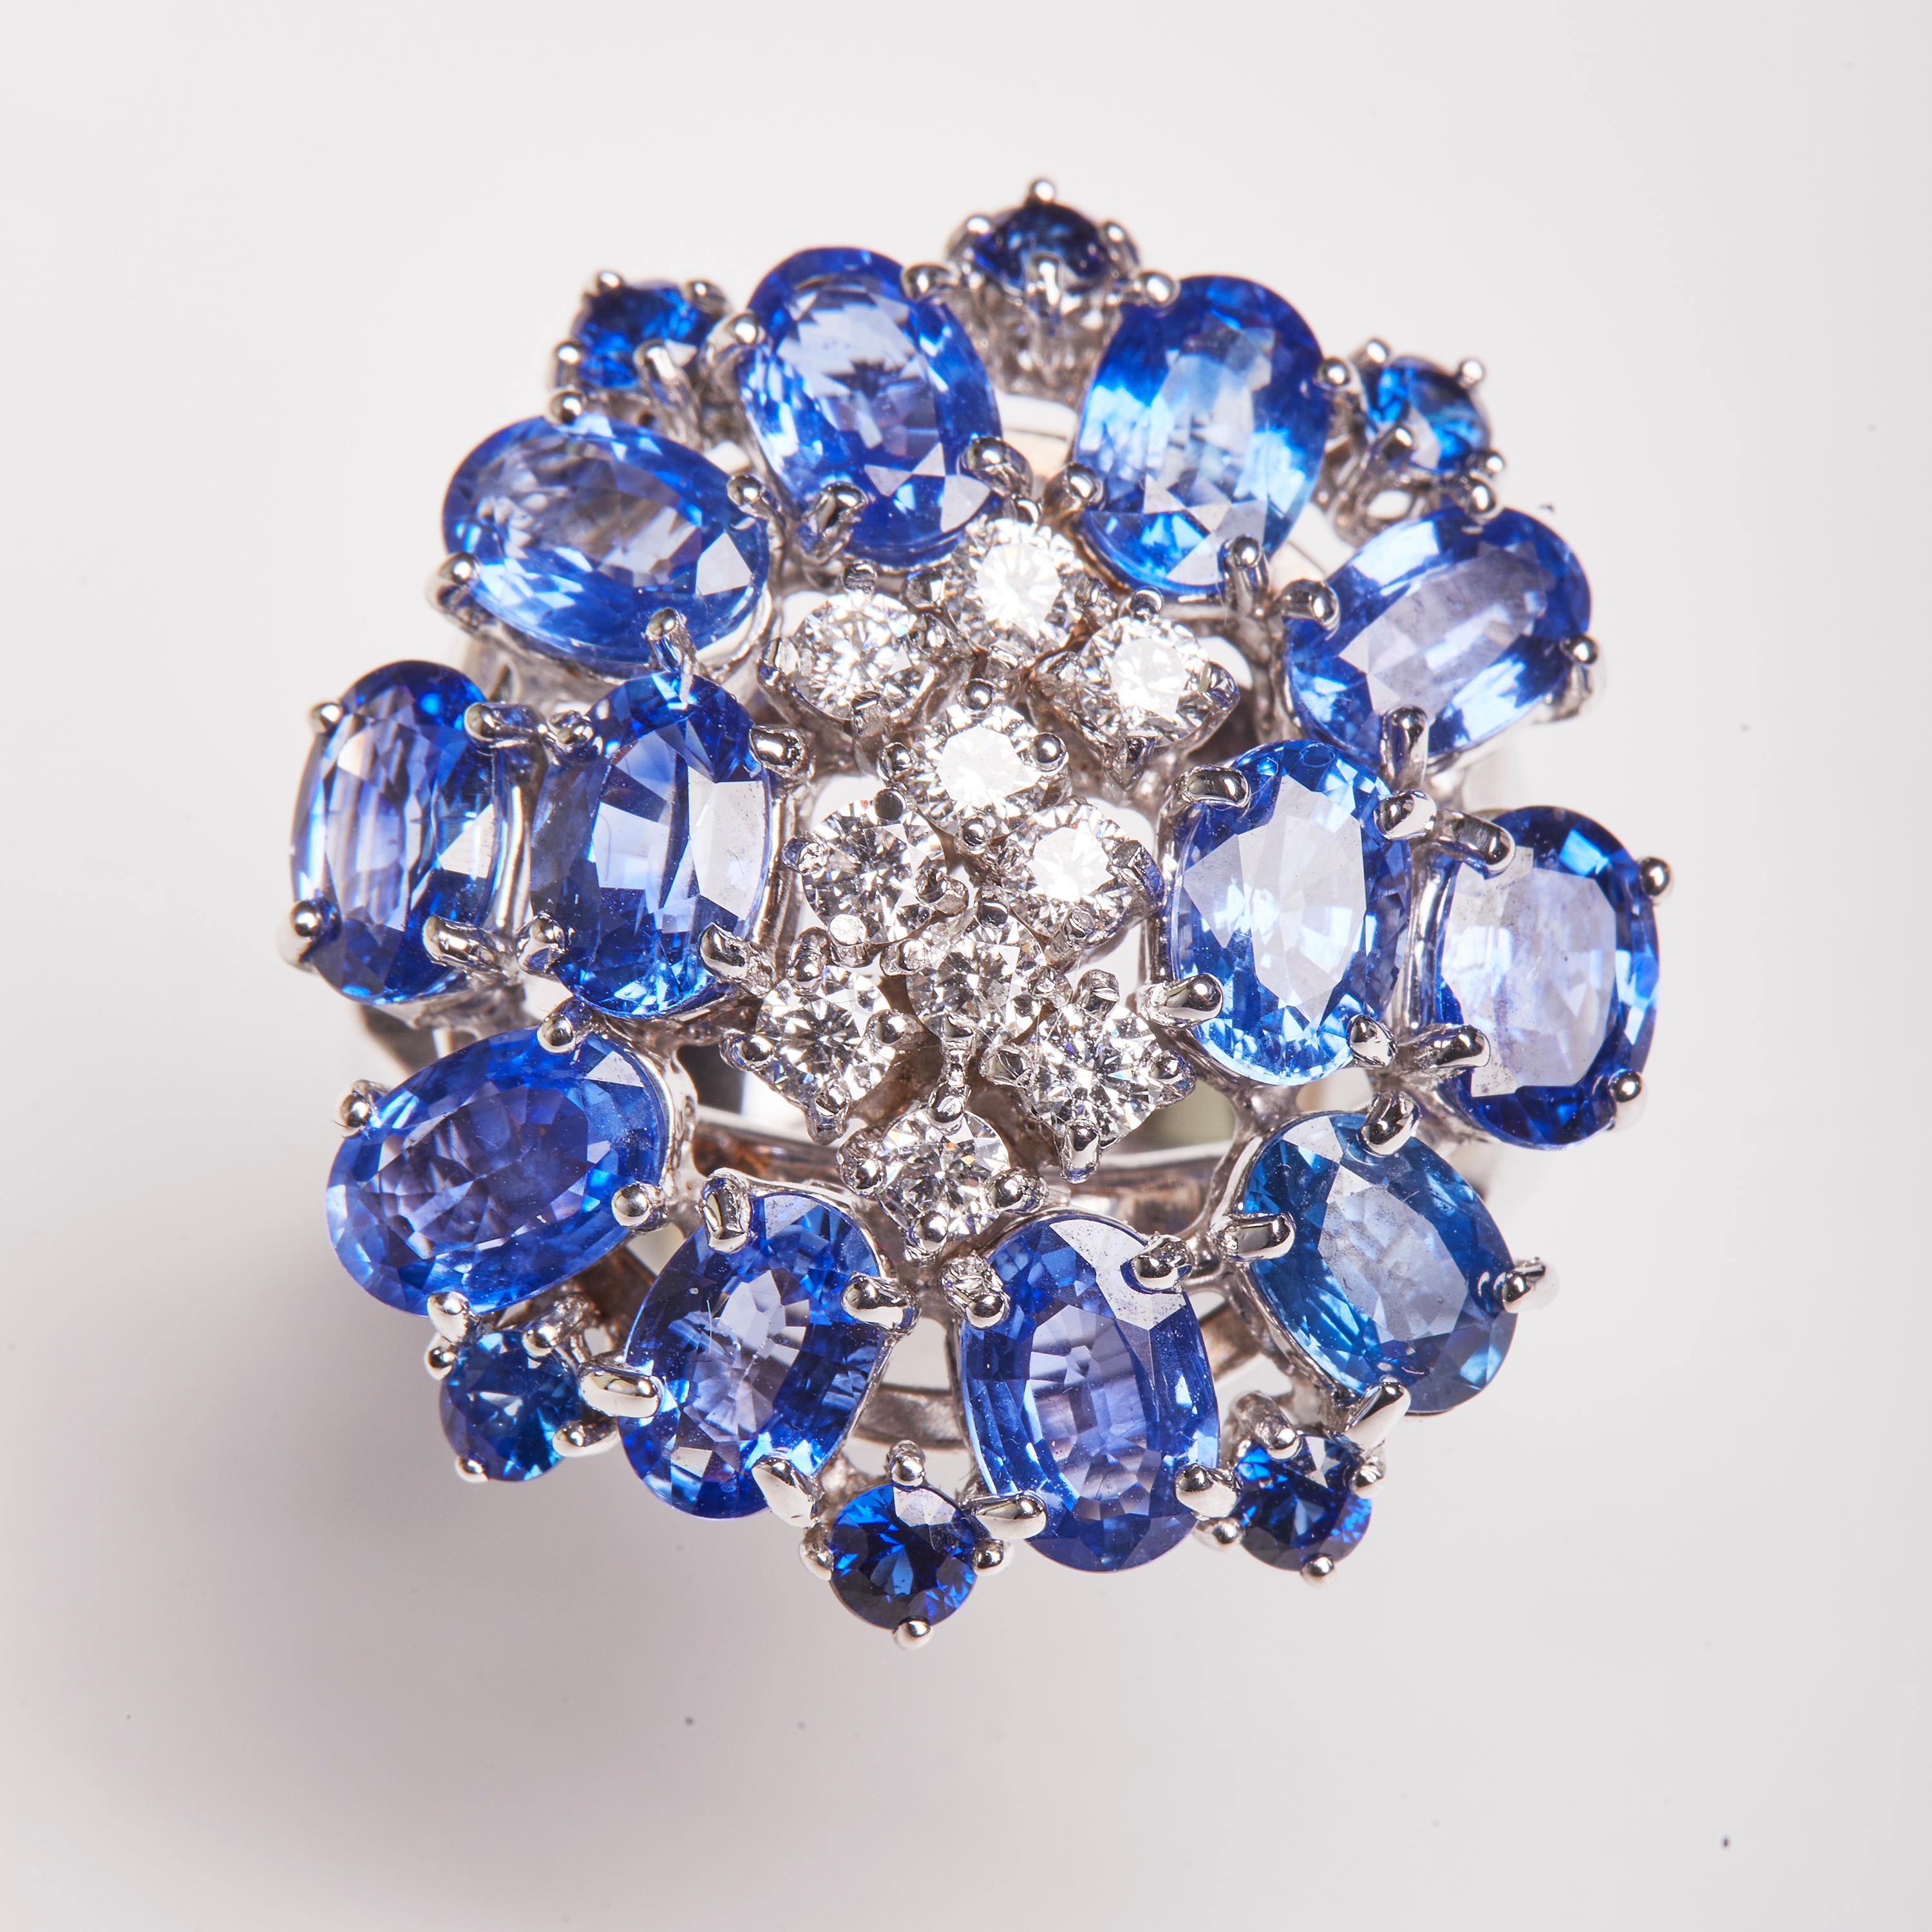 This 18 Karat White Gold Cocktail Ring features an outer layer oval cut Sapphire stones in a circular pattern, highlighting a midst of Diamonds. This exquisite ring would make a lovely pairing to our 18 Karat White Gold Sapphire And Diamond Dangle